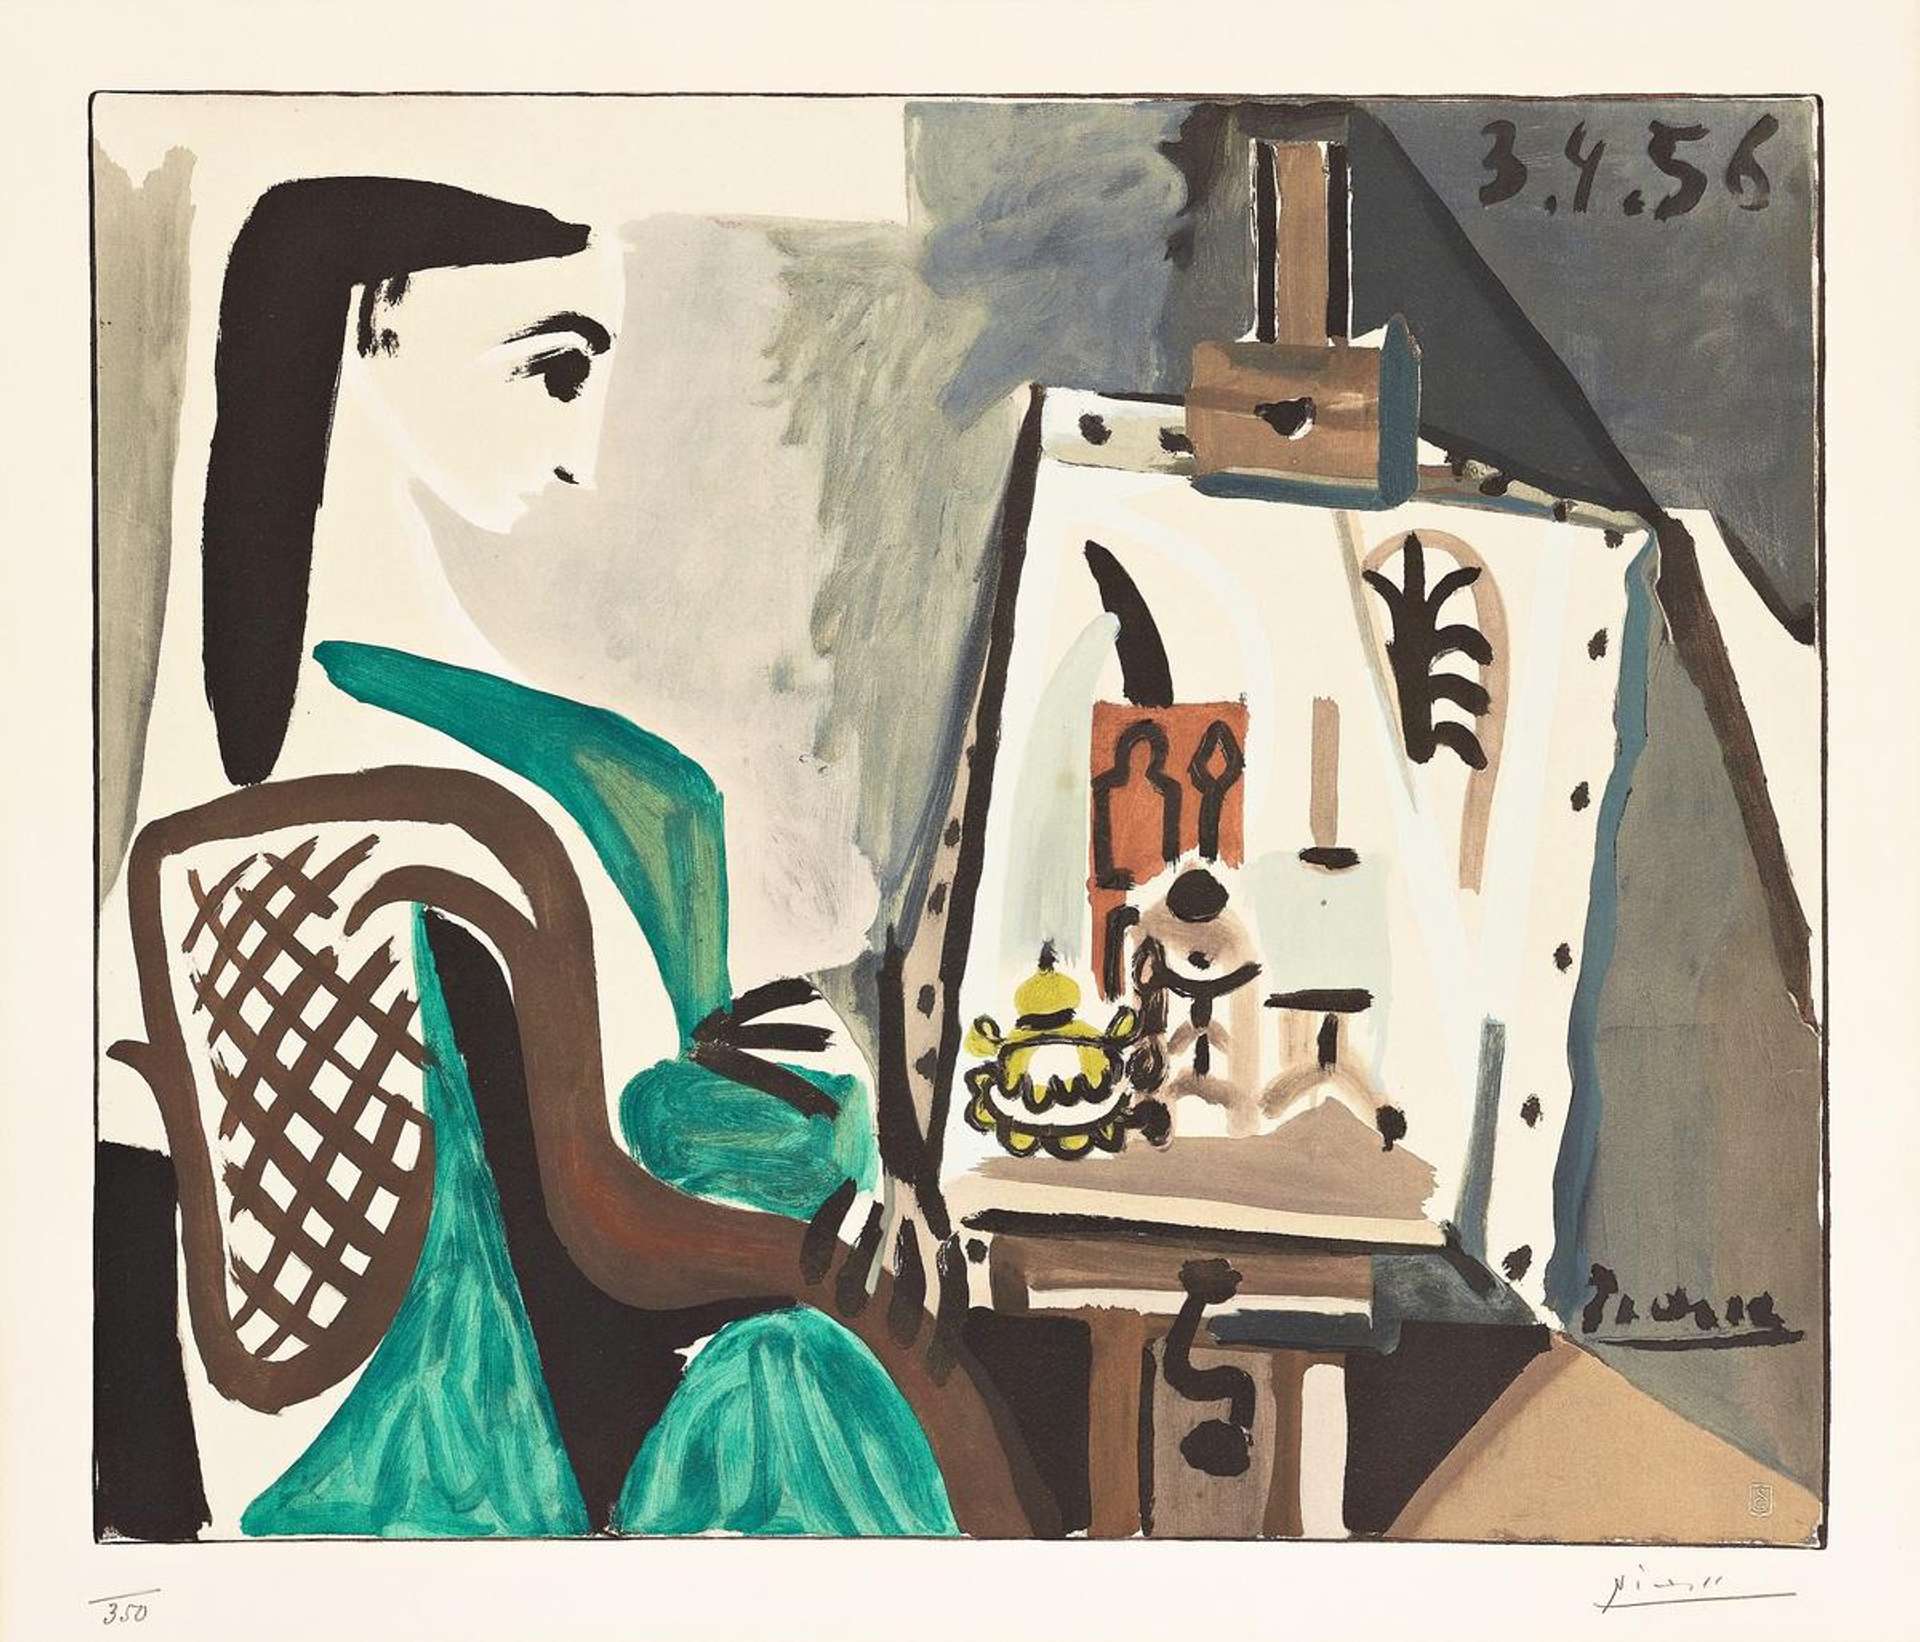 In this print, a woman is shown in an atelier and gazing at a canvas. She is depicted in geometric, angular shapes, characteristic of Picasso's cubist style.